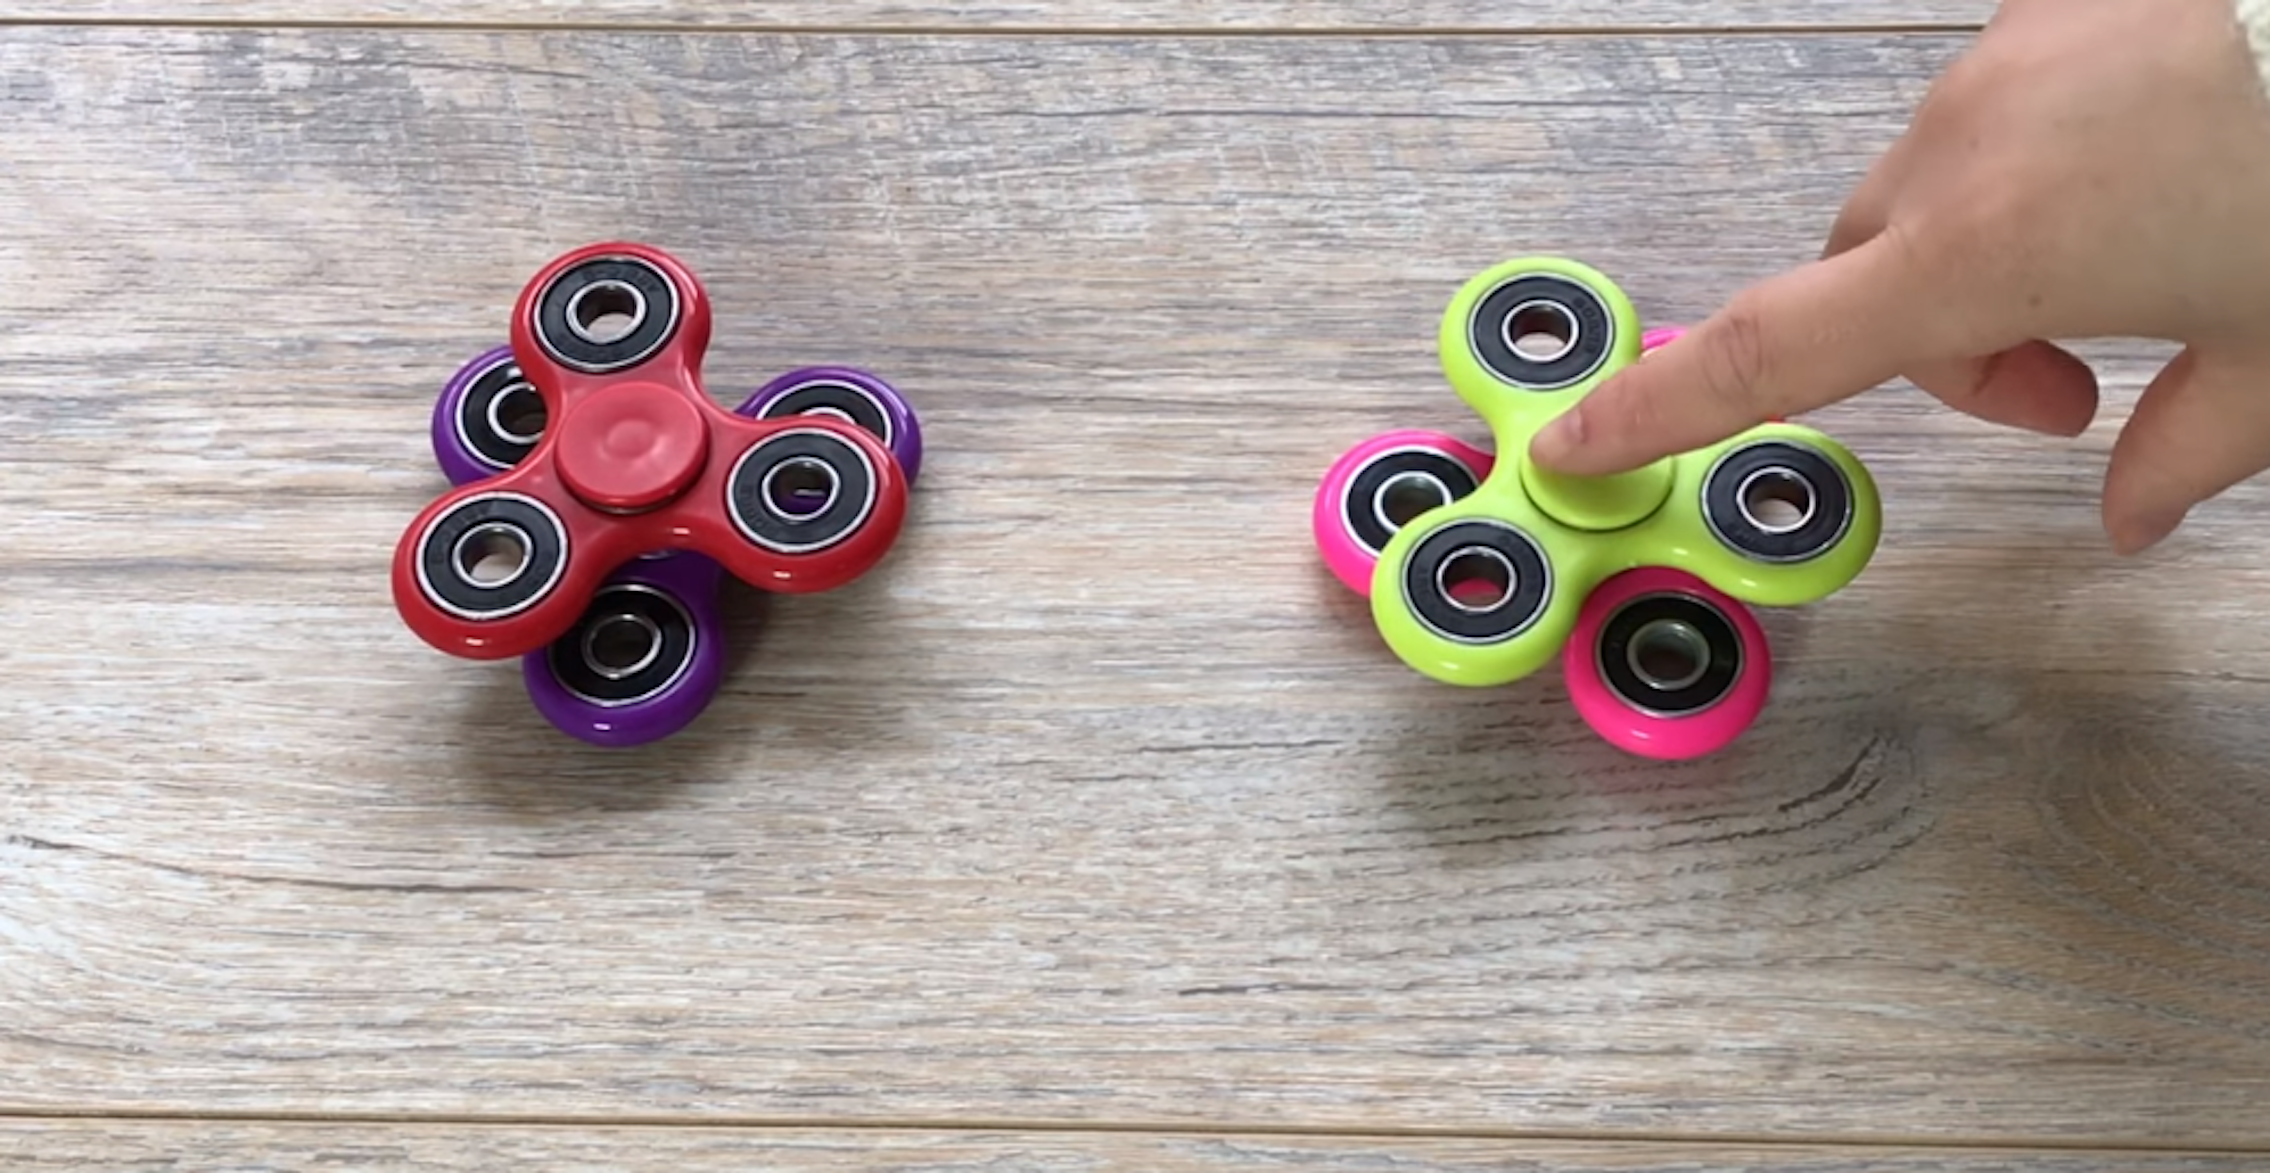 HOW TO MAKE SPINNER TOY